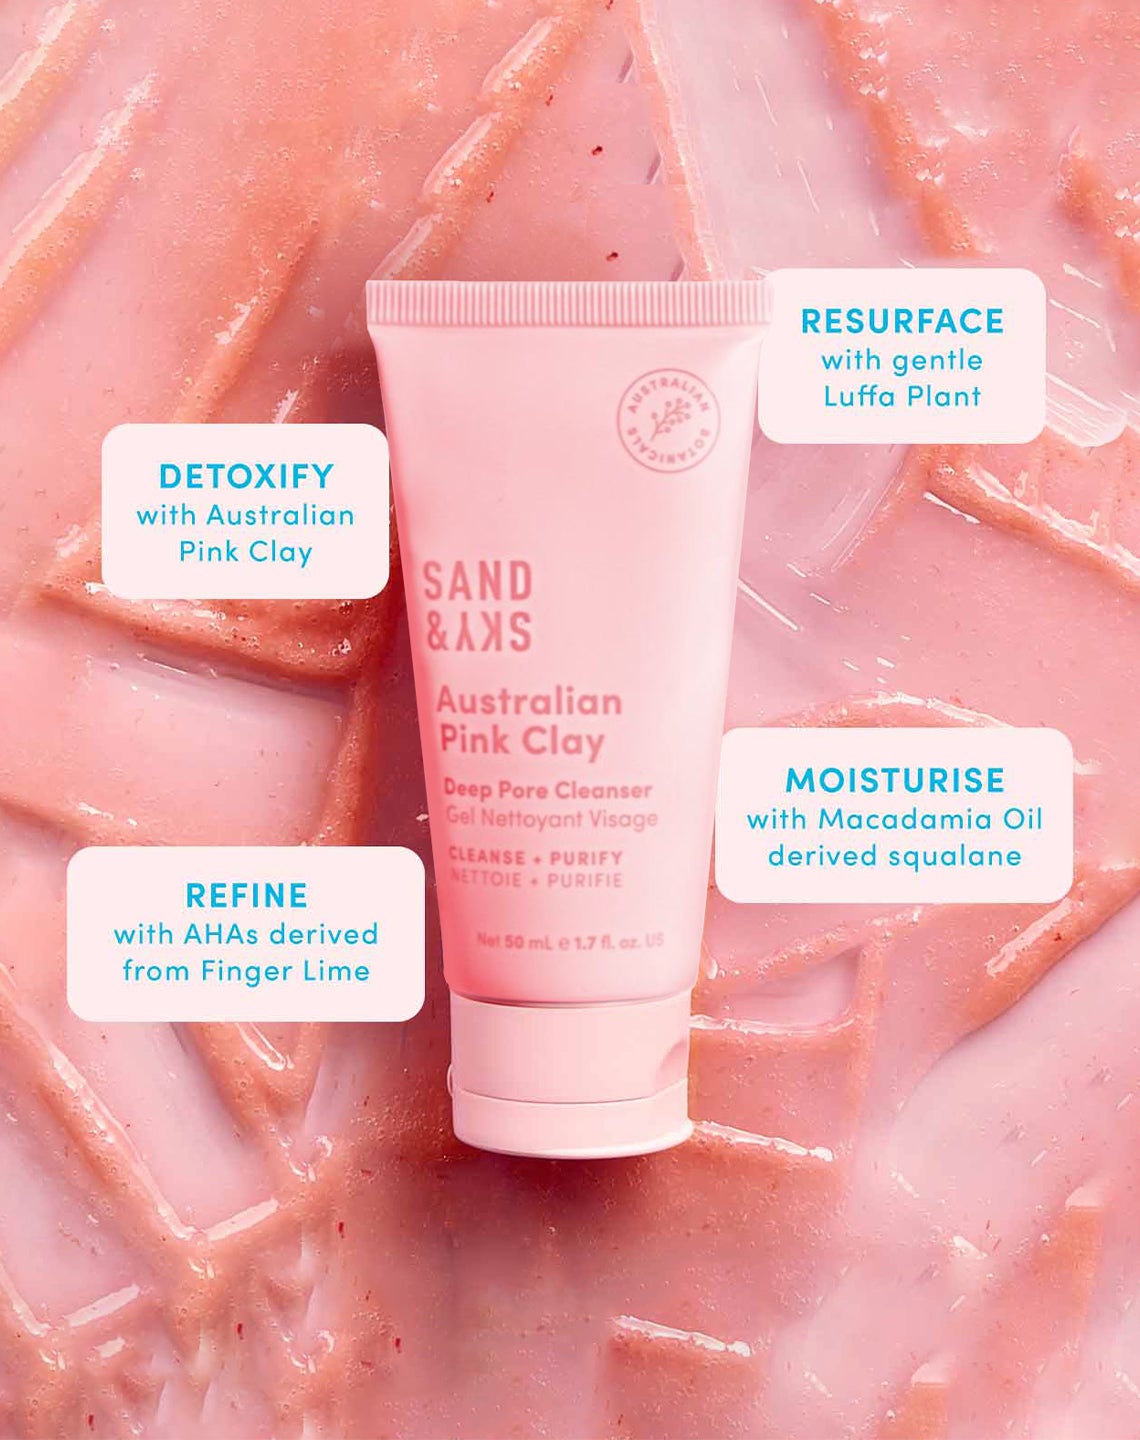 Australian Pink Clay Deep Pore Cleanser Deluxe Travel Size